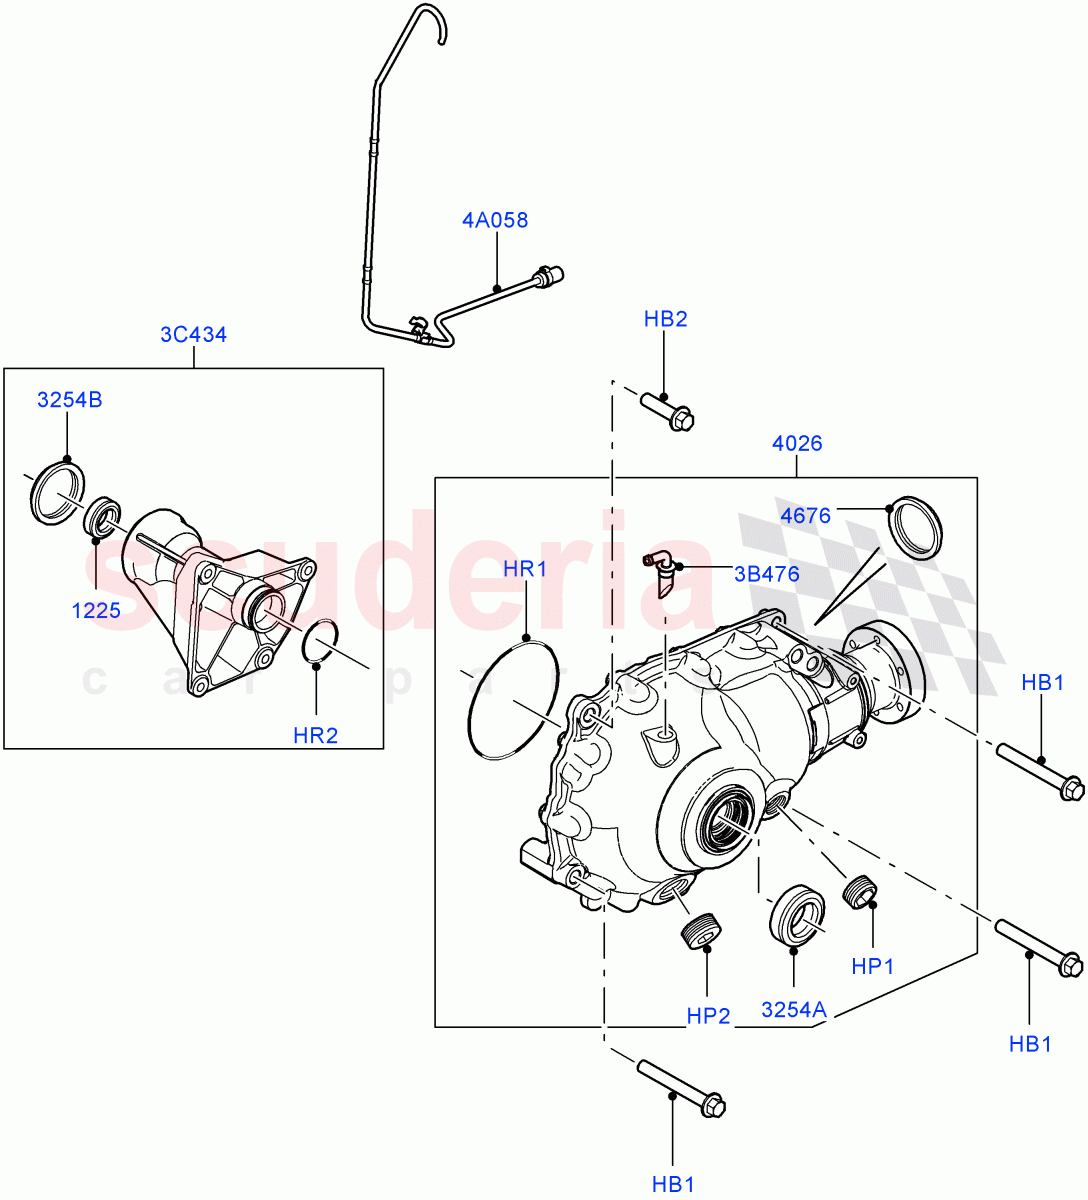 Front Axle Case((V)FROMAA000001) of Land Rover Land Rover Range Rover (2010-2012) [4.4 DOHC Diesel V8 DITC]